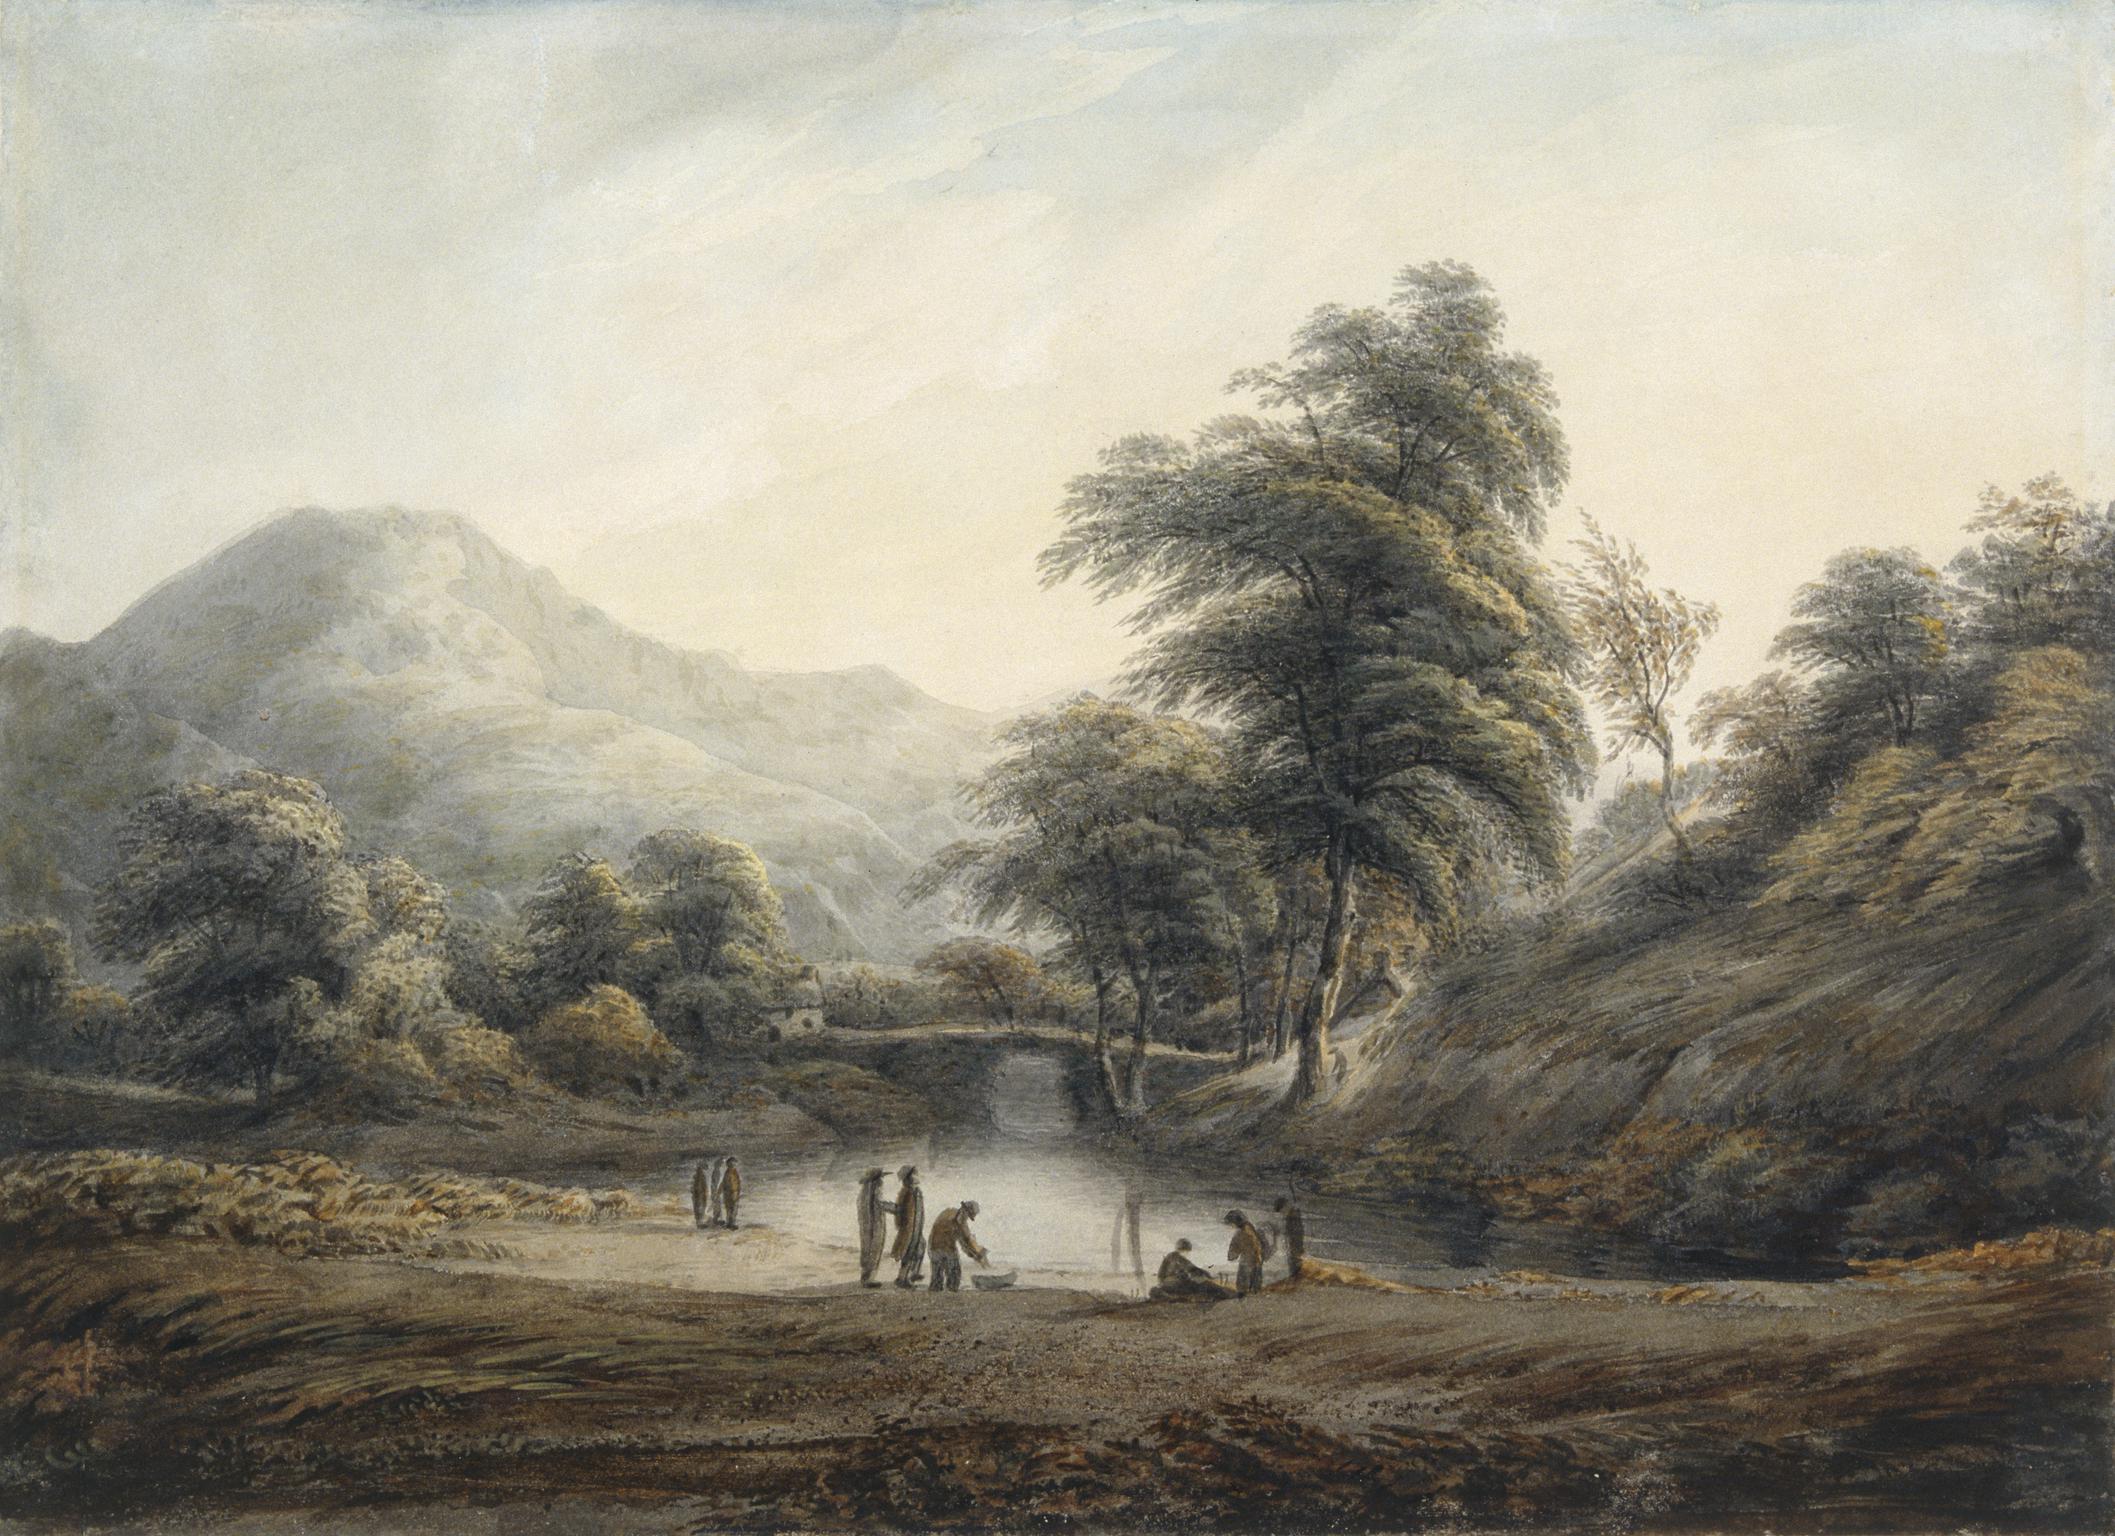 Panning for Gold in the Mawddach (painting)